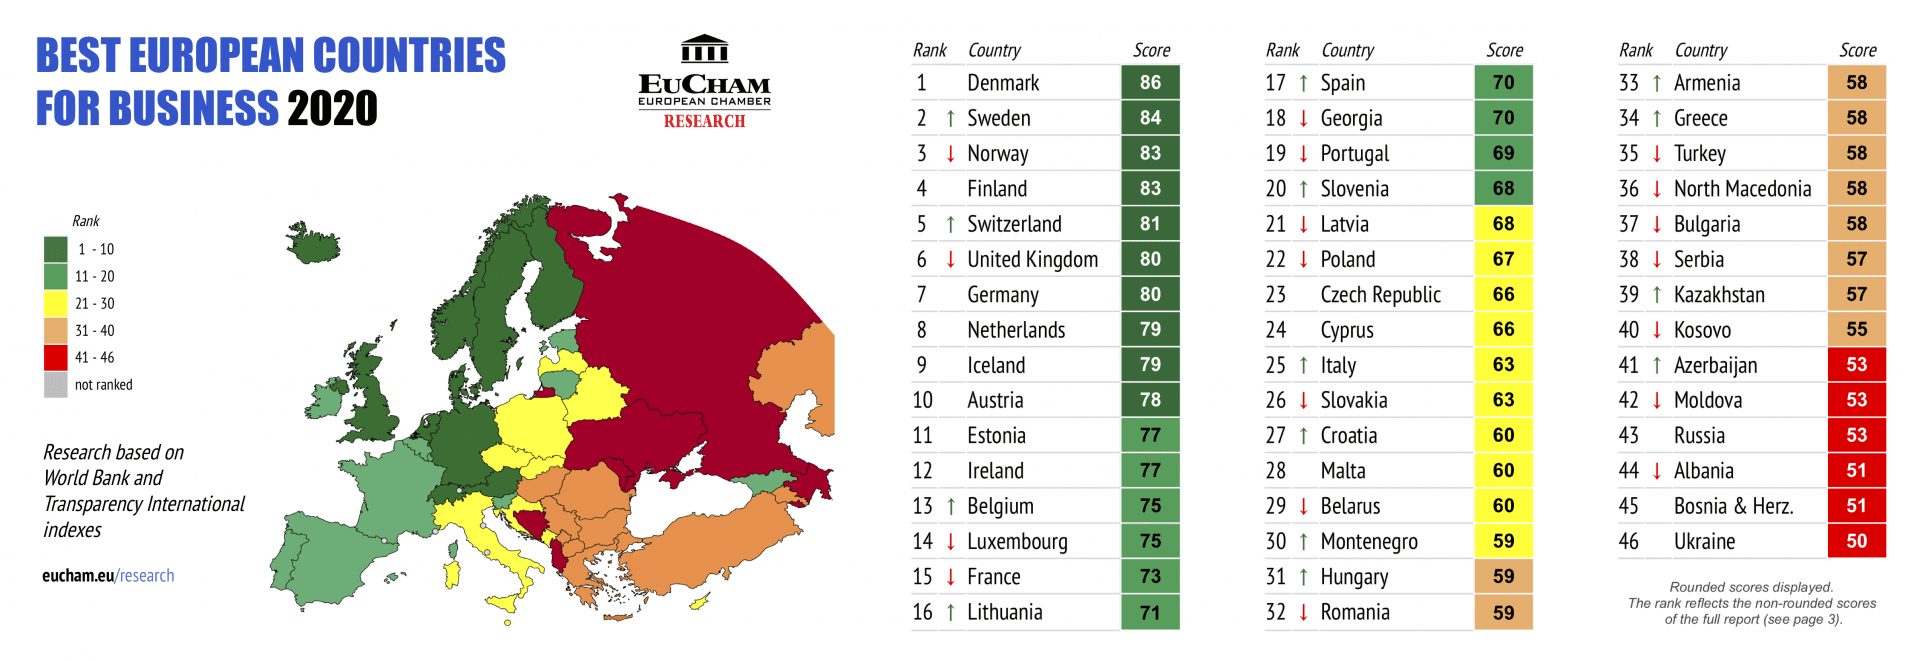 best european countries for business in 2020